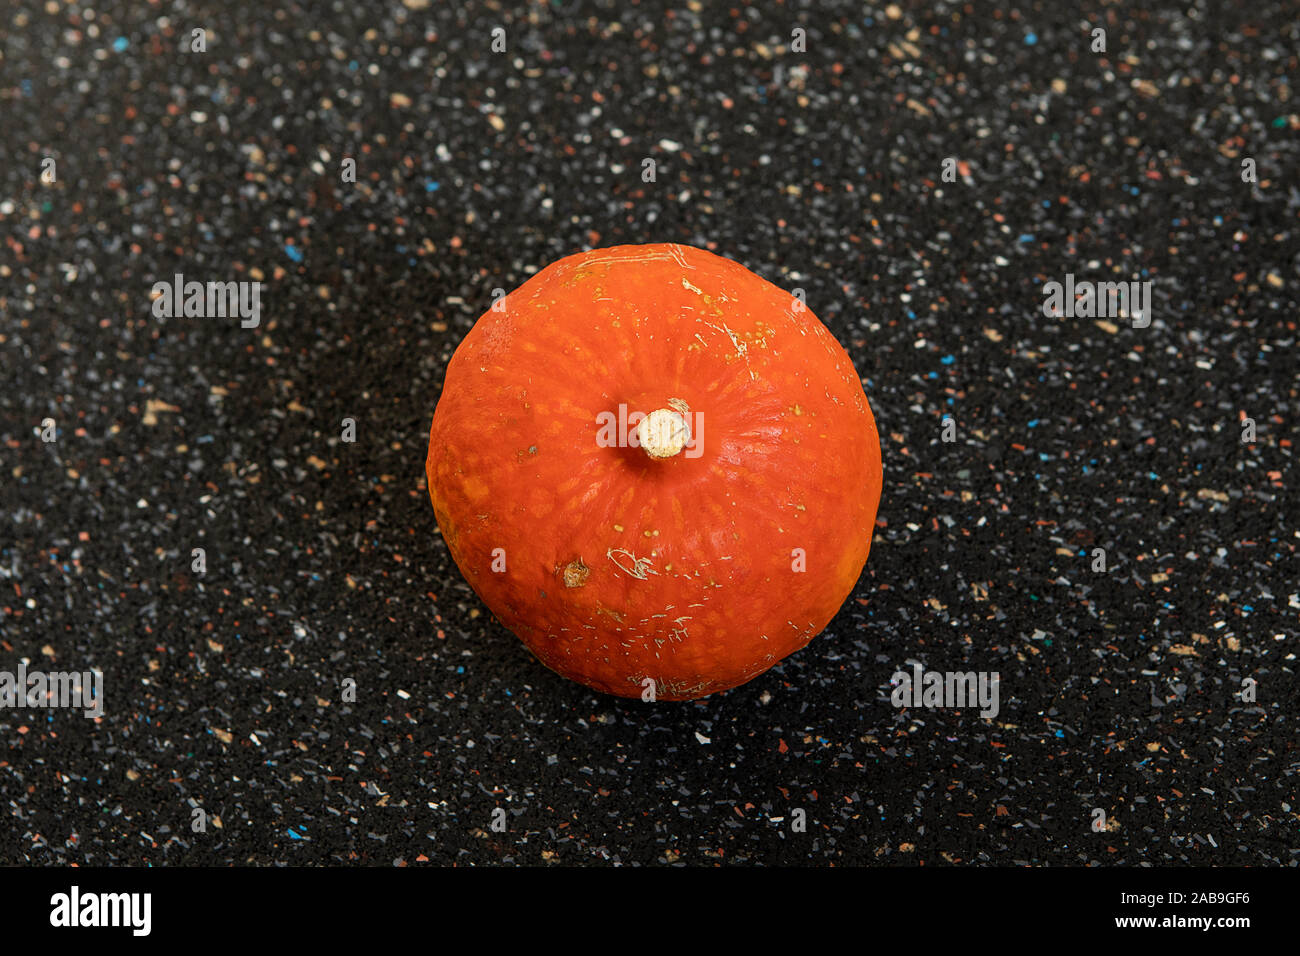 Orange round cucurbit on dark speckled background. Pumpkin oval shape and textured surface still life. Simple abstract composition. Food art concept, Stock Photo